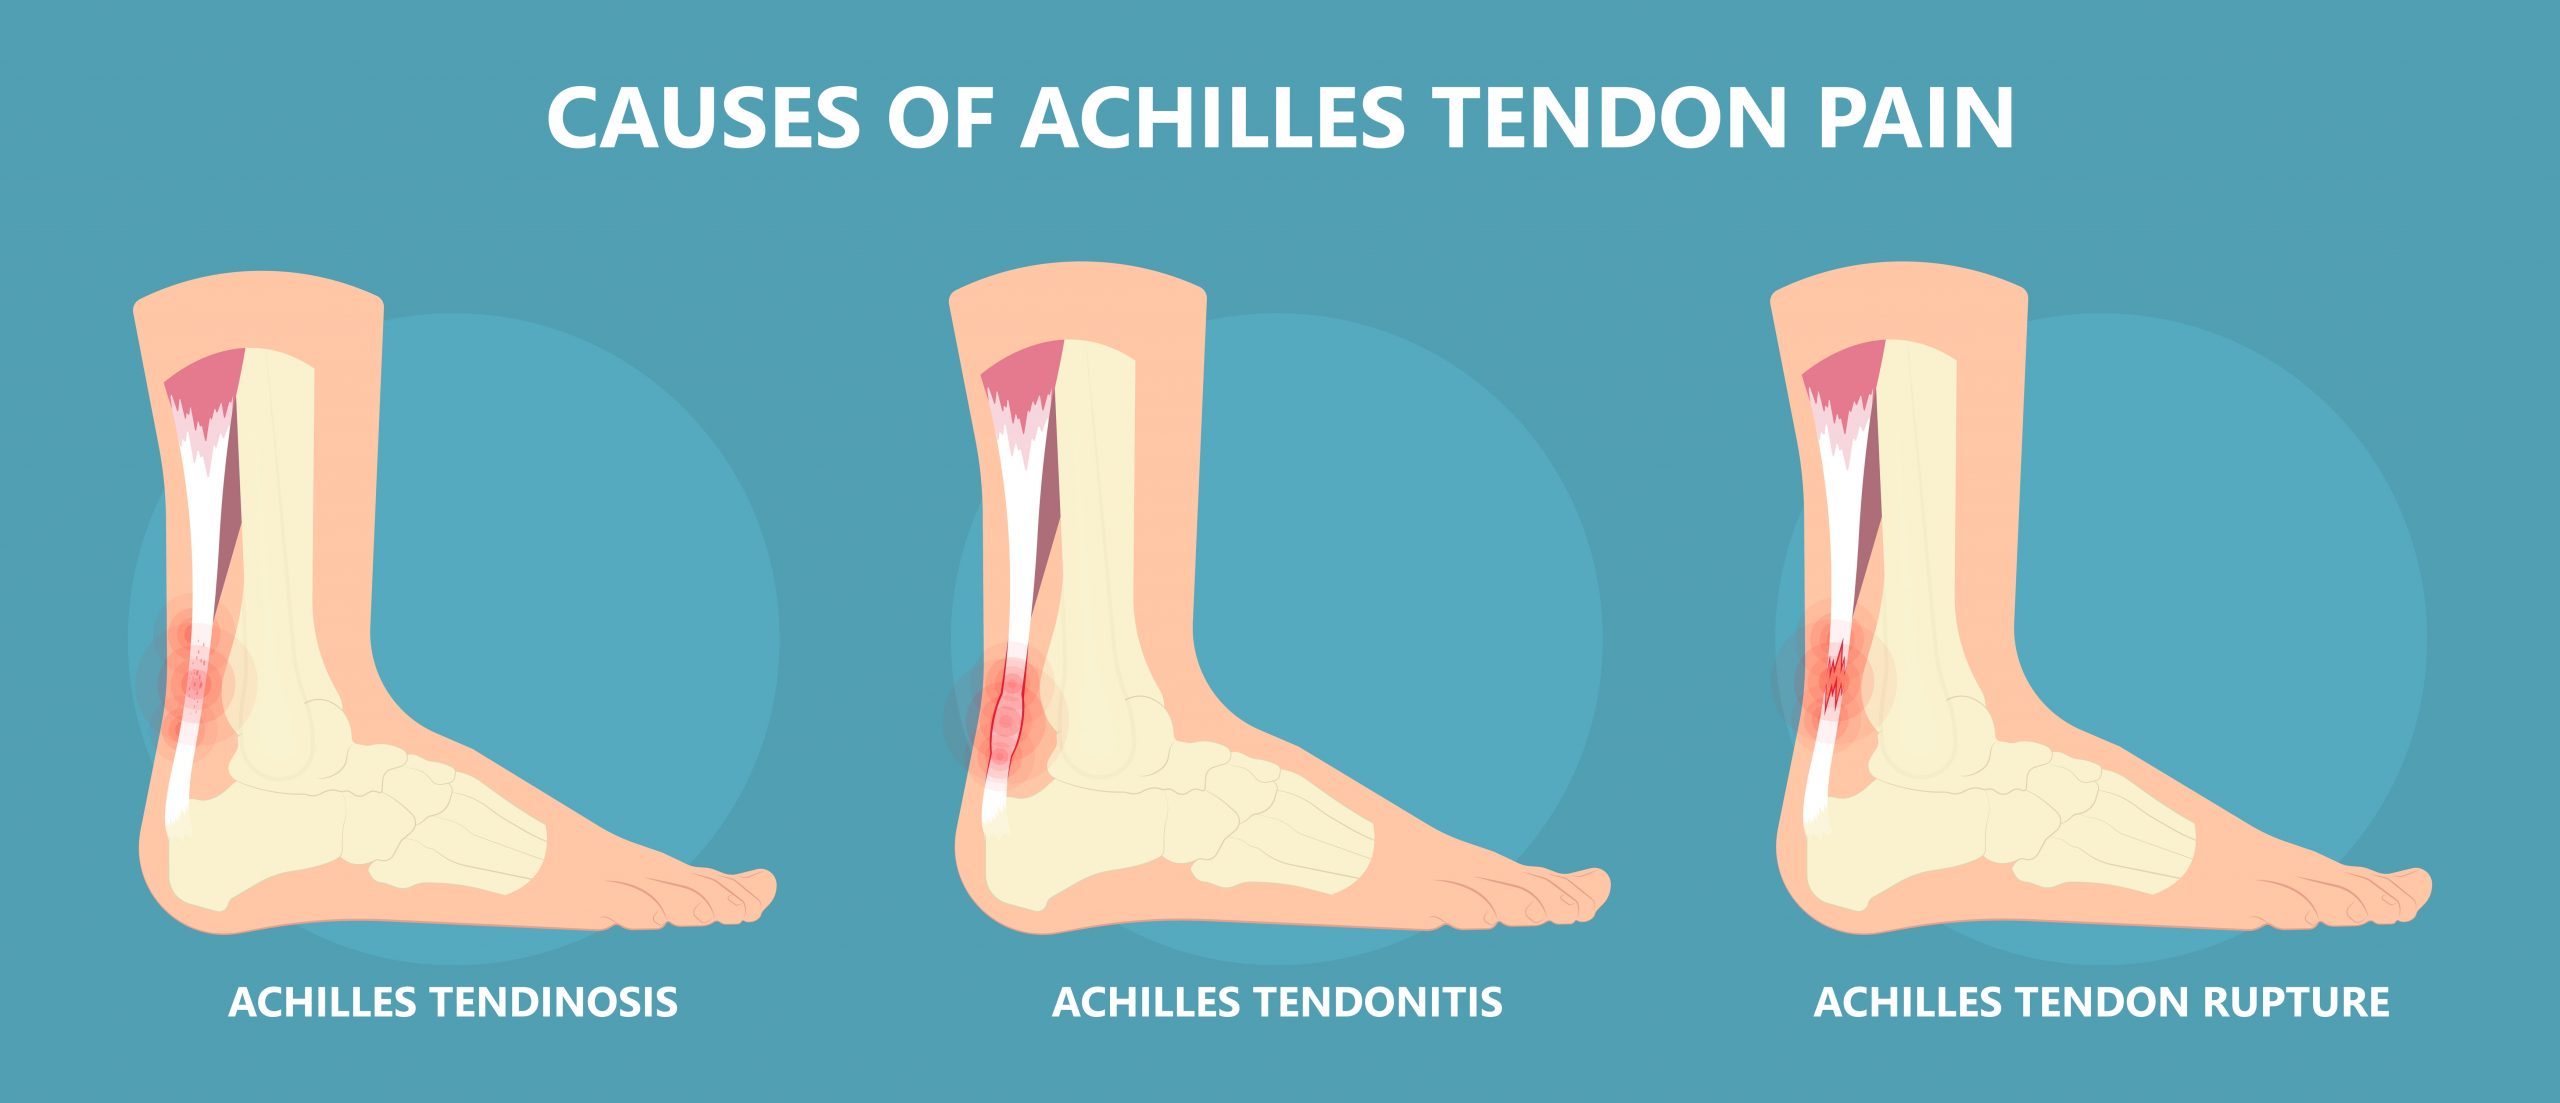 Achilles Tendon Injury: Symptoms, Causes, Treatment & Recovery